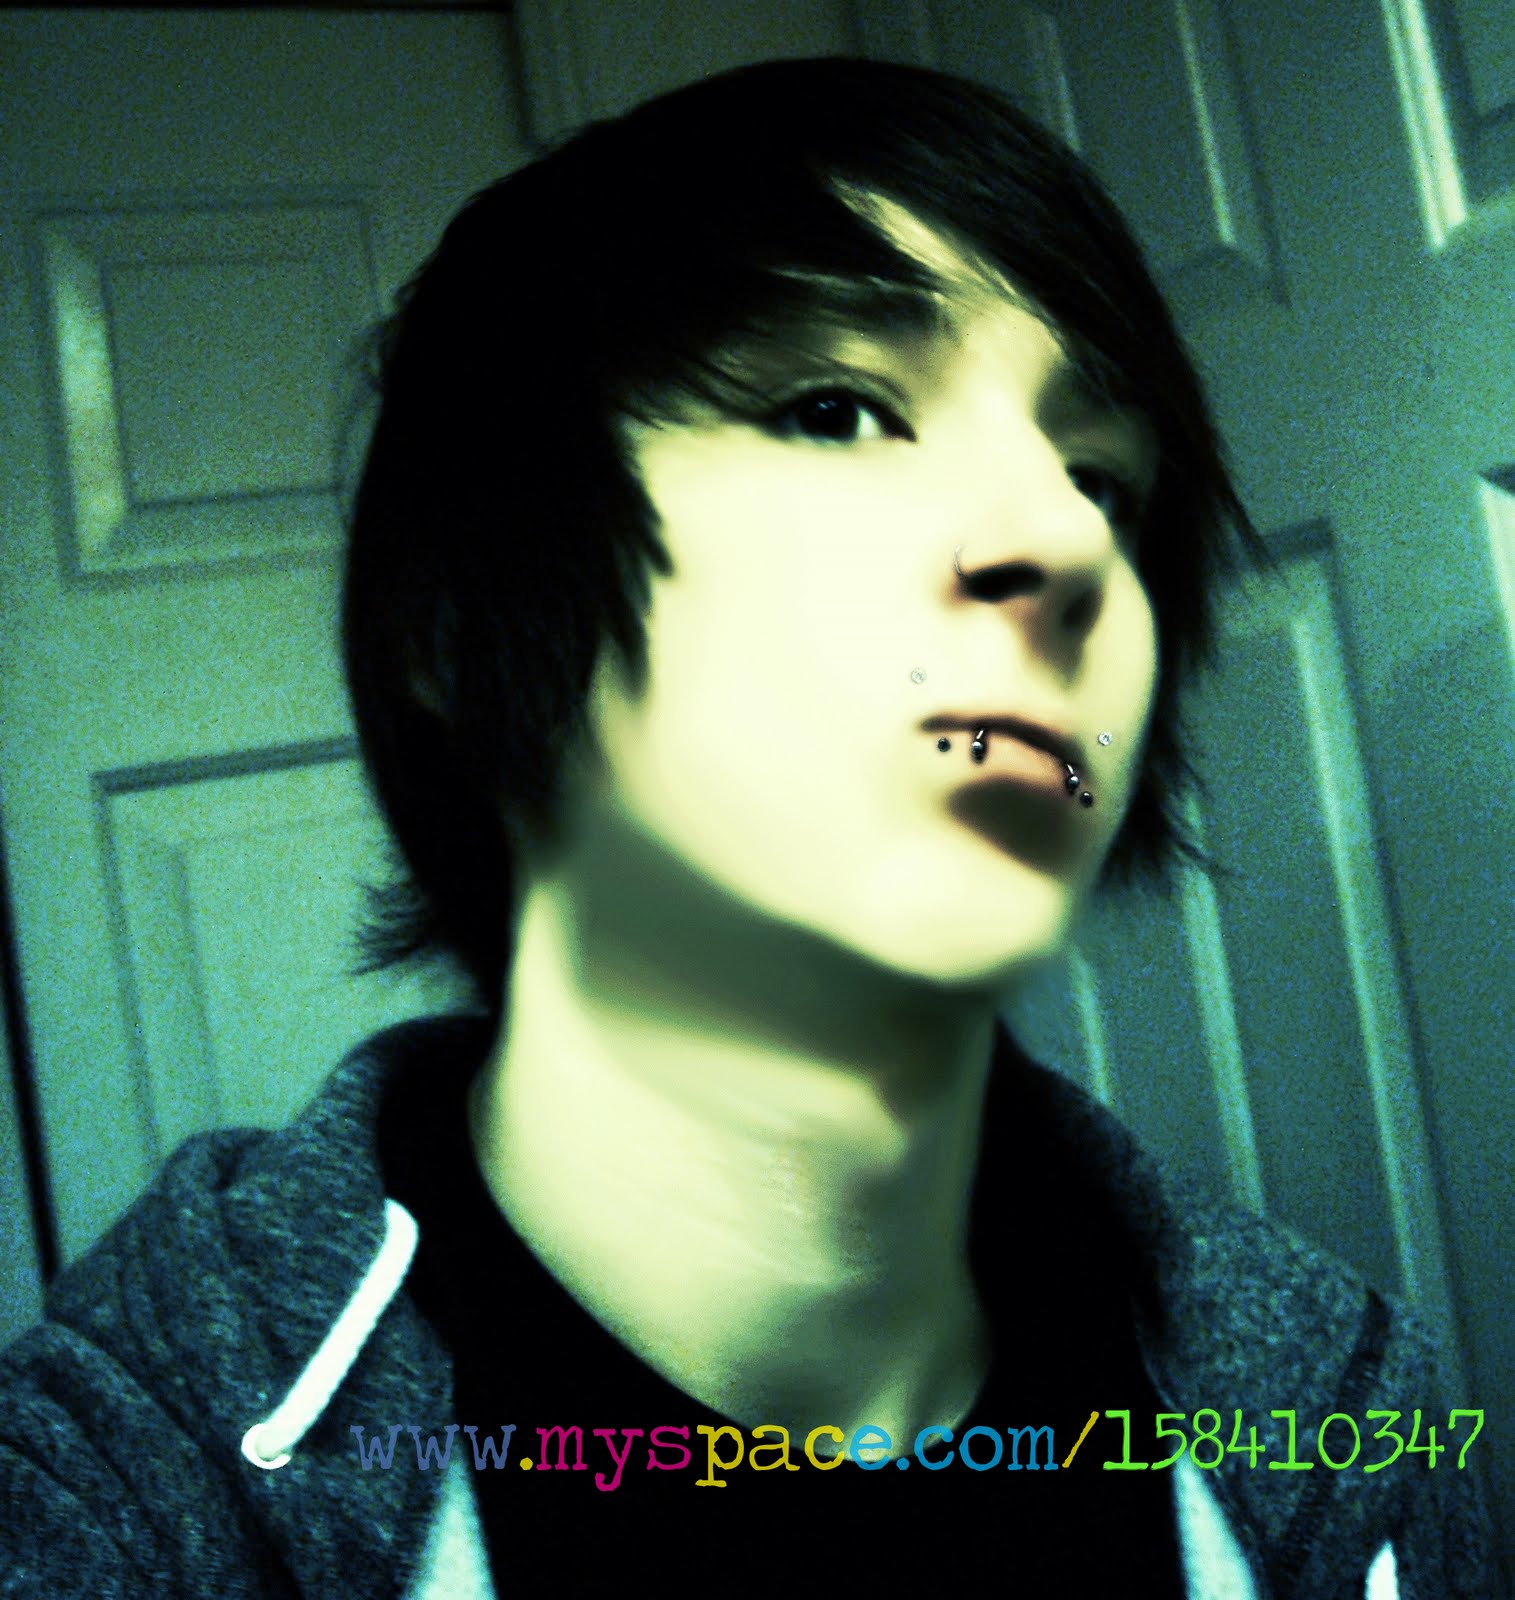 [sexy-scene-emo-hair-picture.jpg]